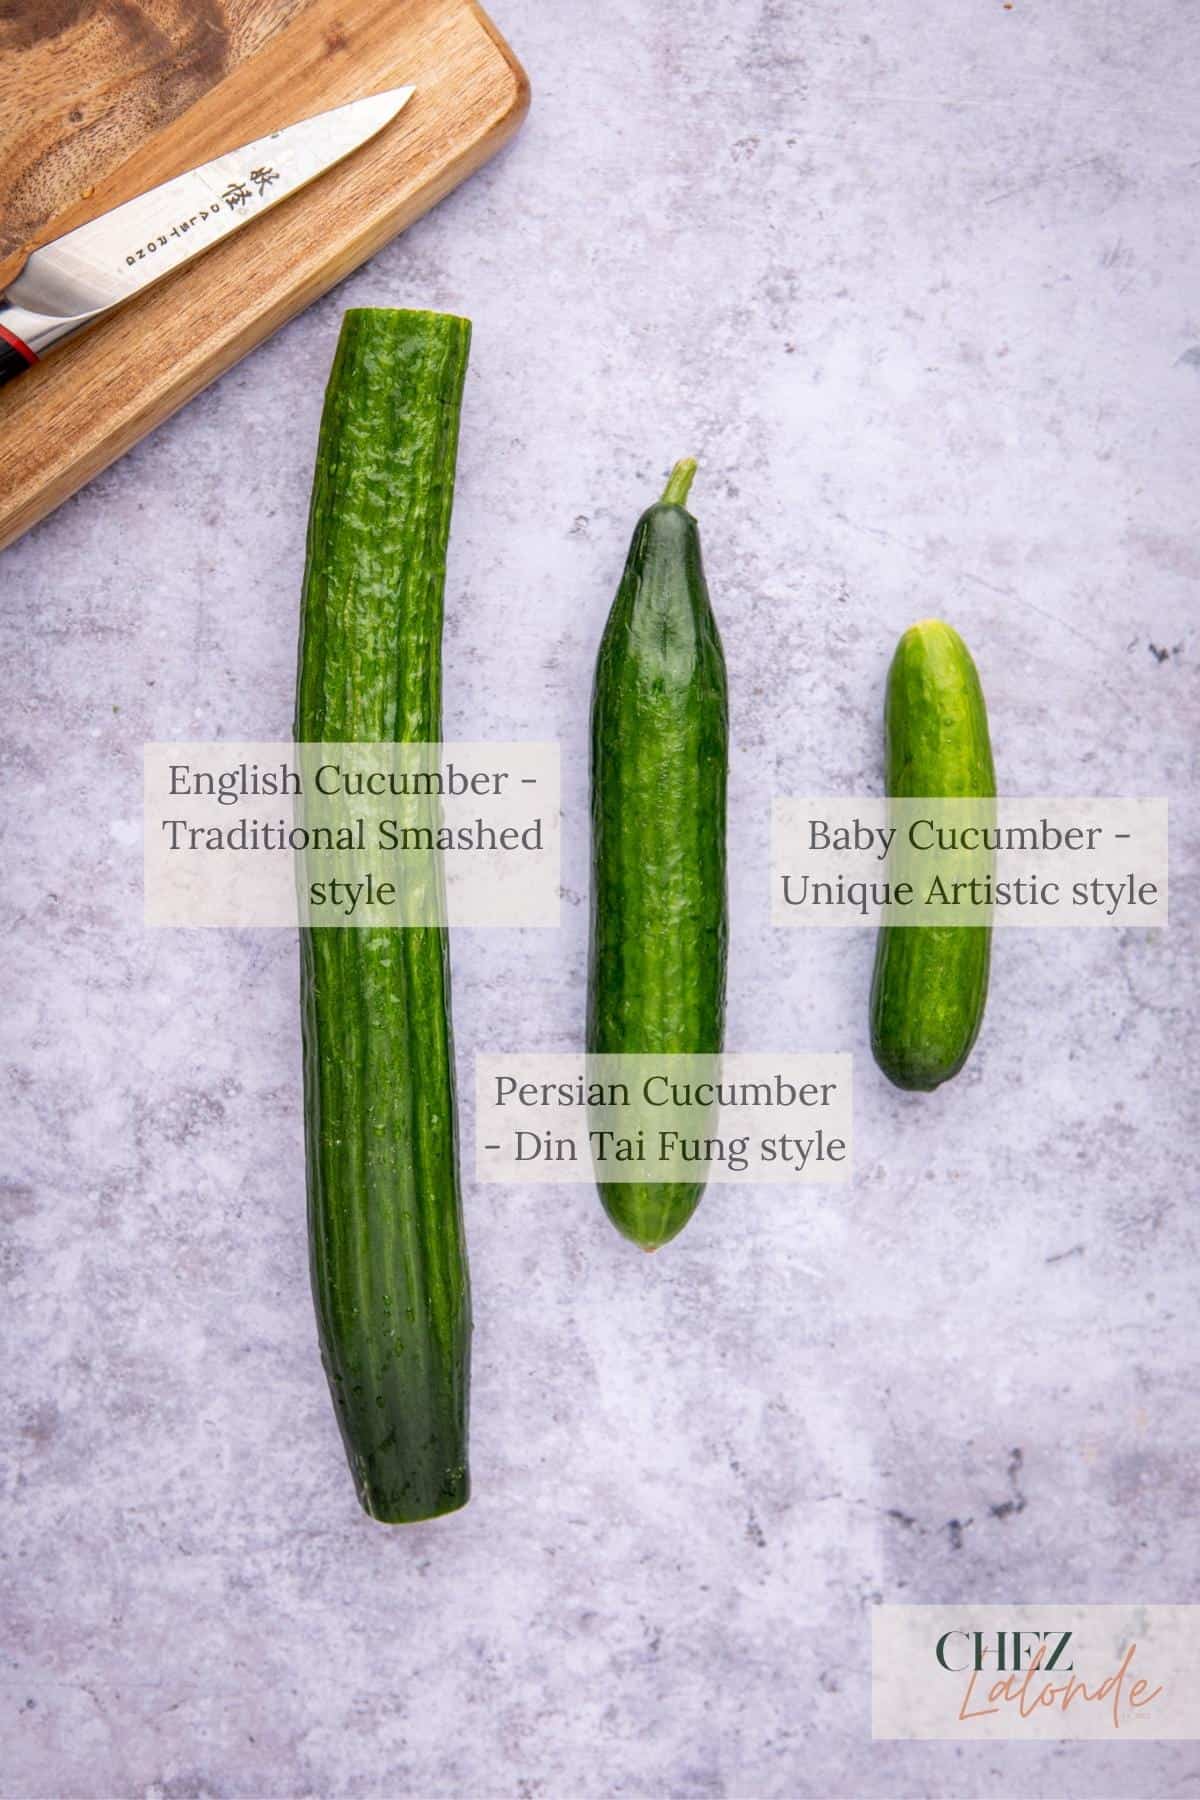 In this picture I am showing 3 different varieties of Cucumber.  From left to right we have English Cucumber, Persian cucumber and baby cucumber. 